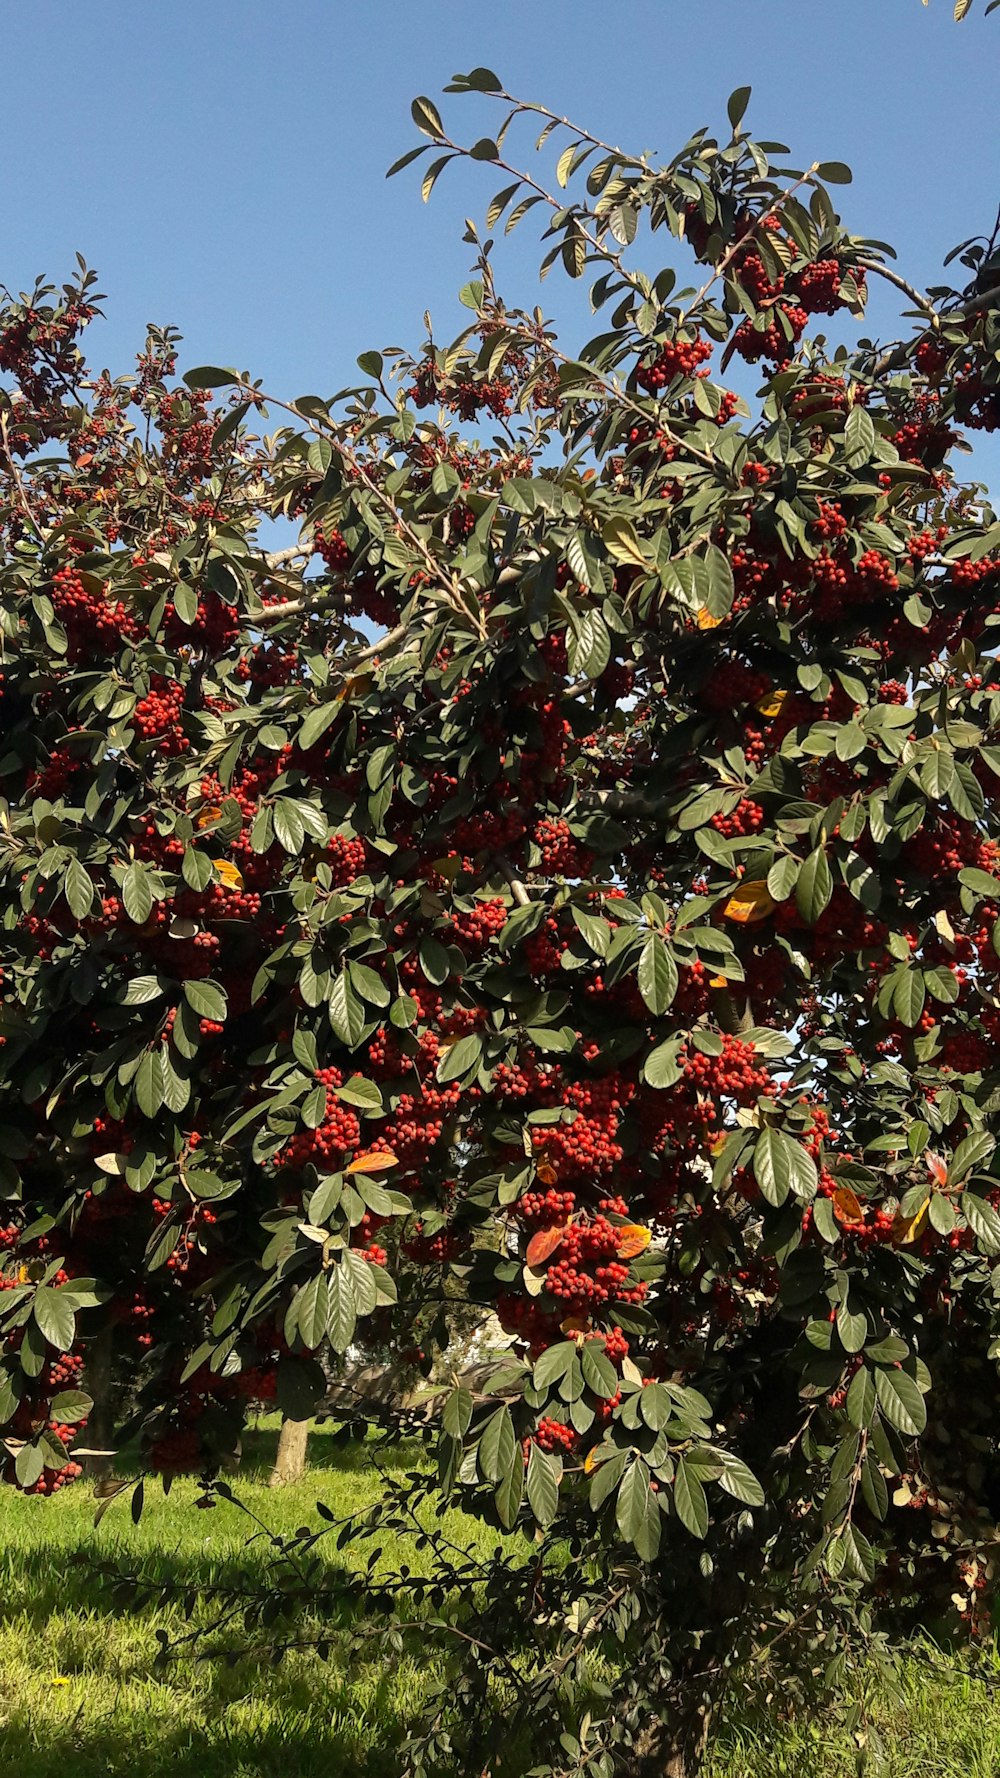 a tree with lots of red berries growing on it